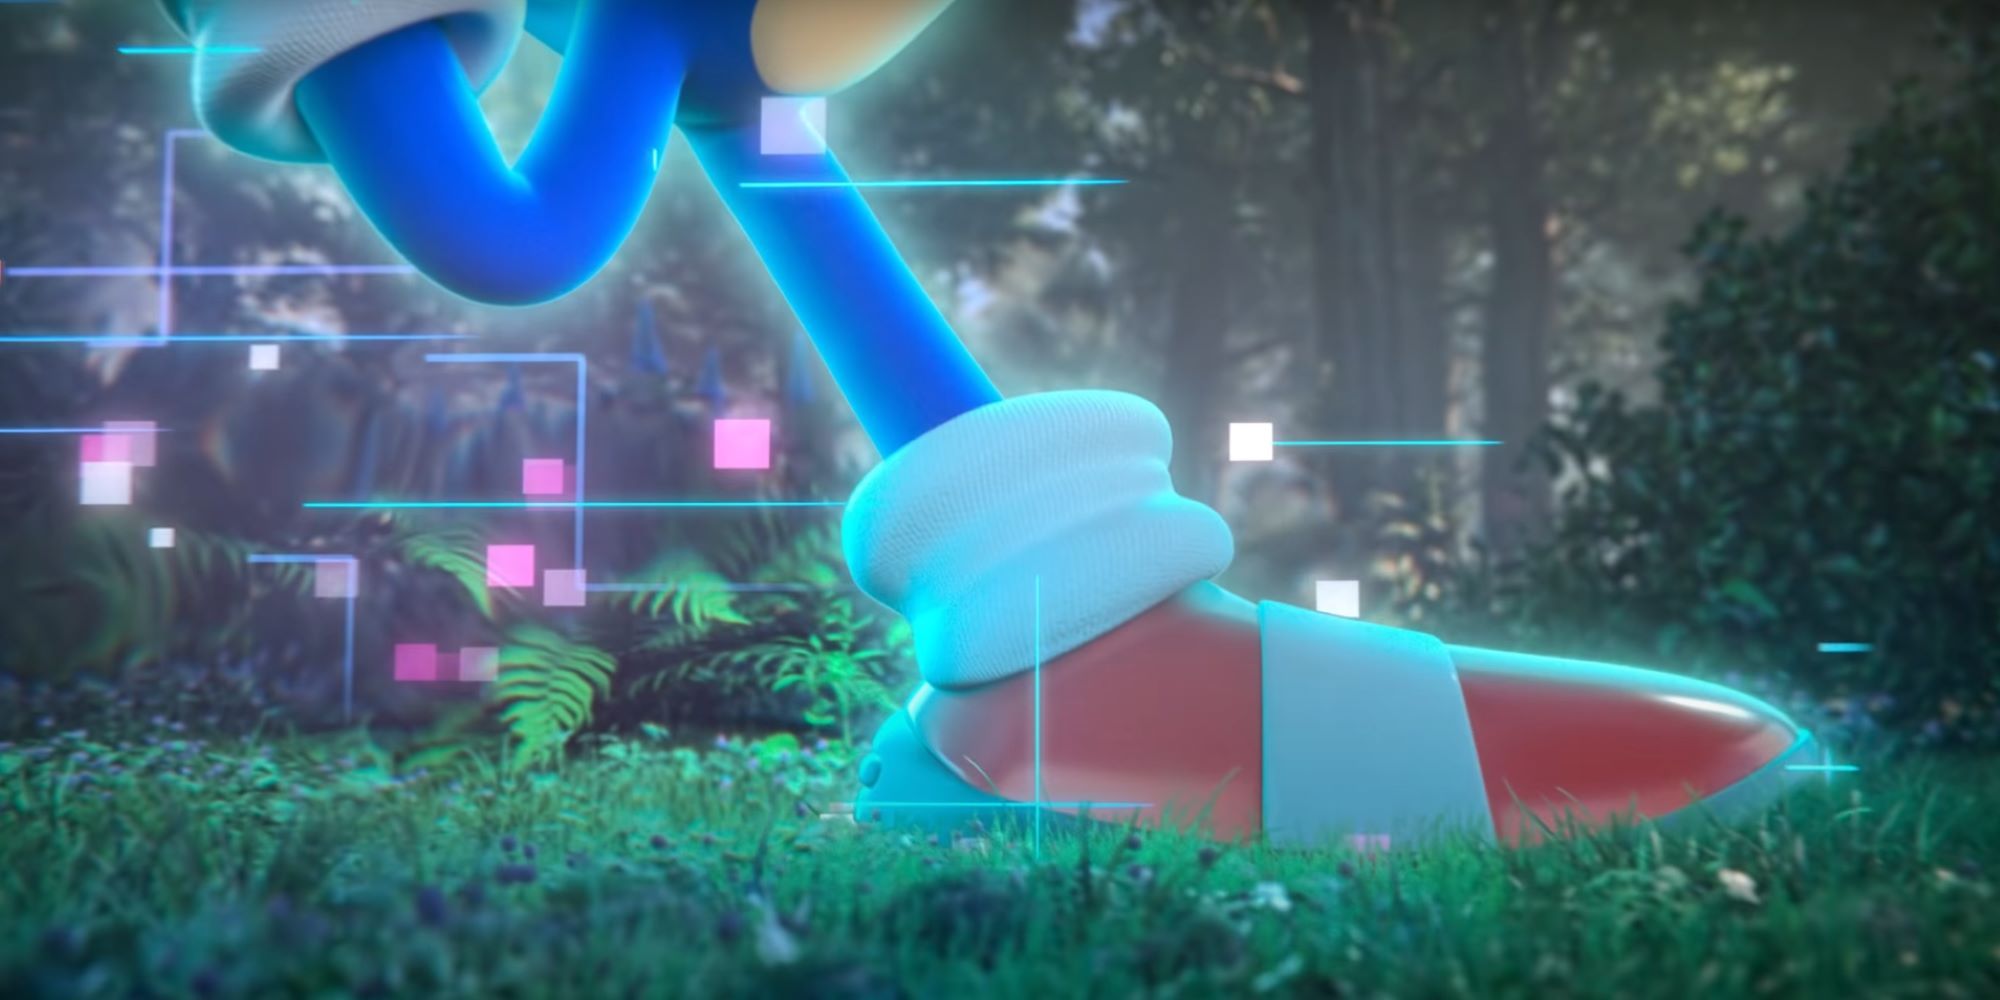 Sonic's foot hits the grass in a still from the Sonic Frontiers trailer